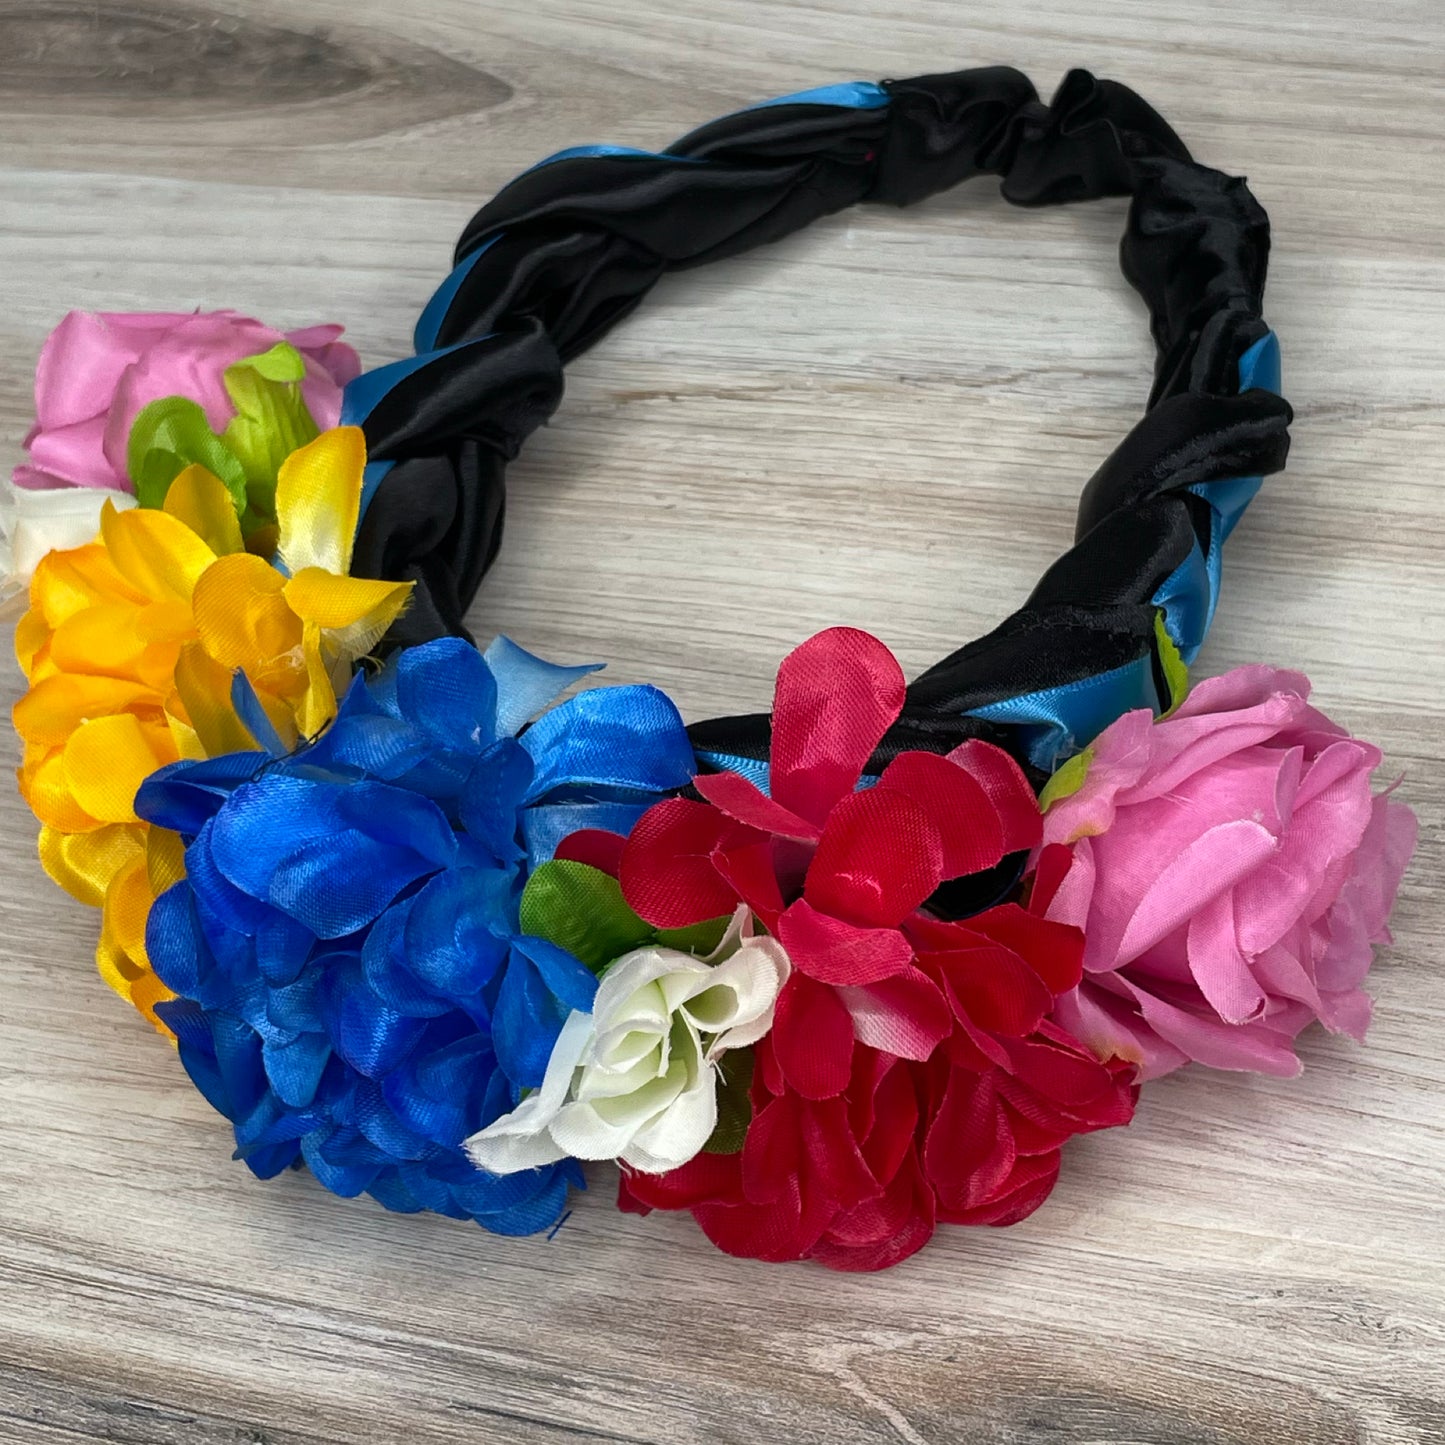 Mexican Braided Headpiece with Flowers